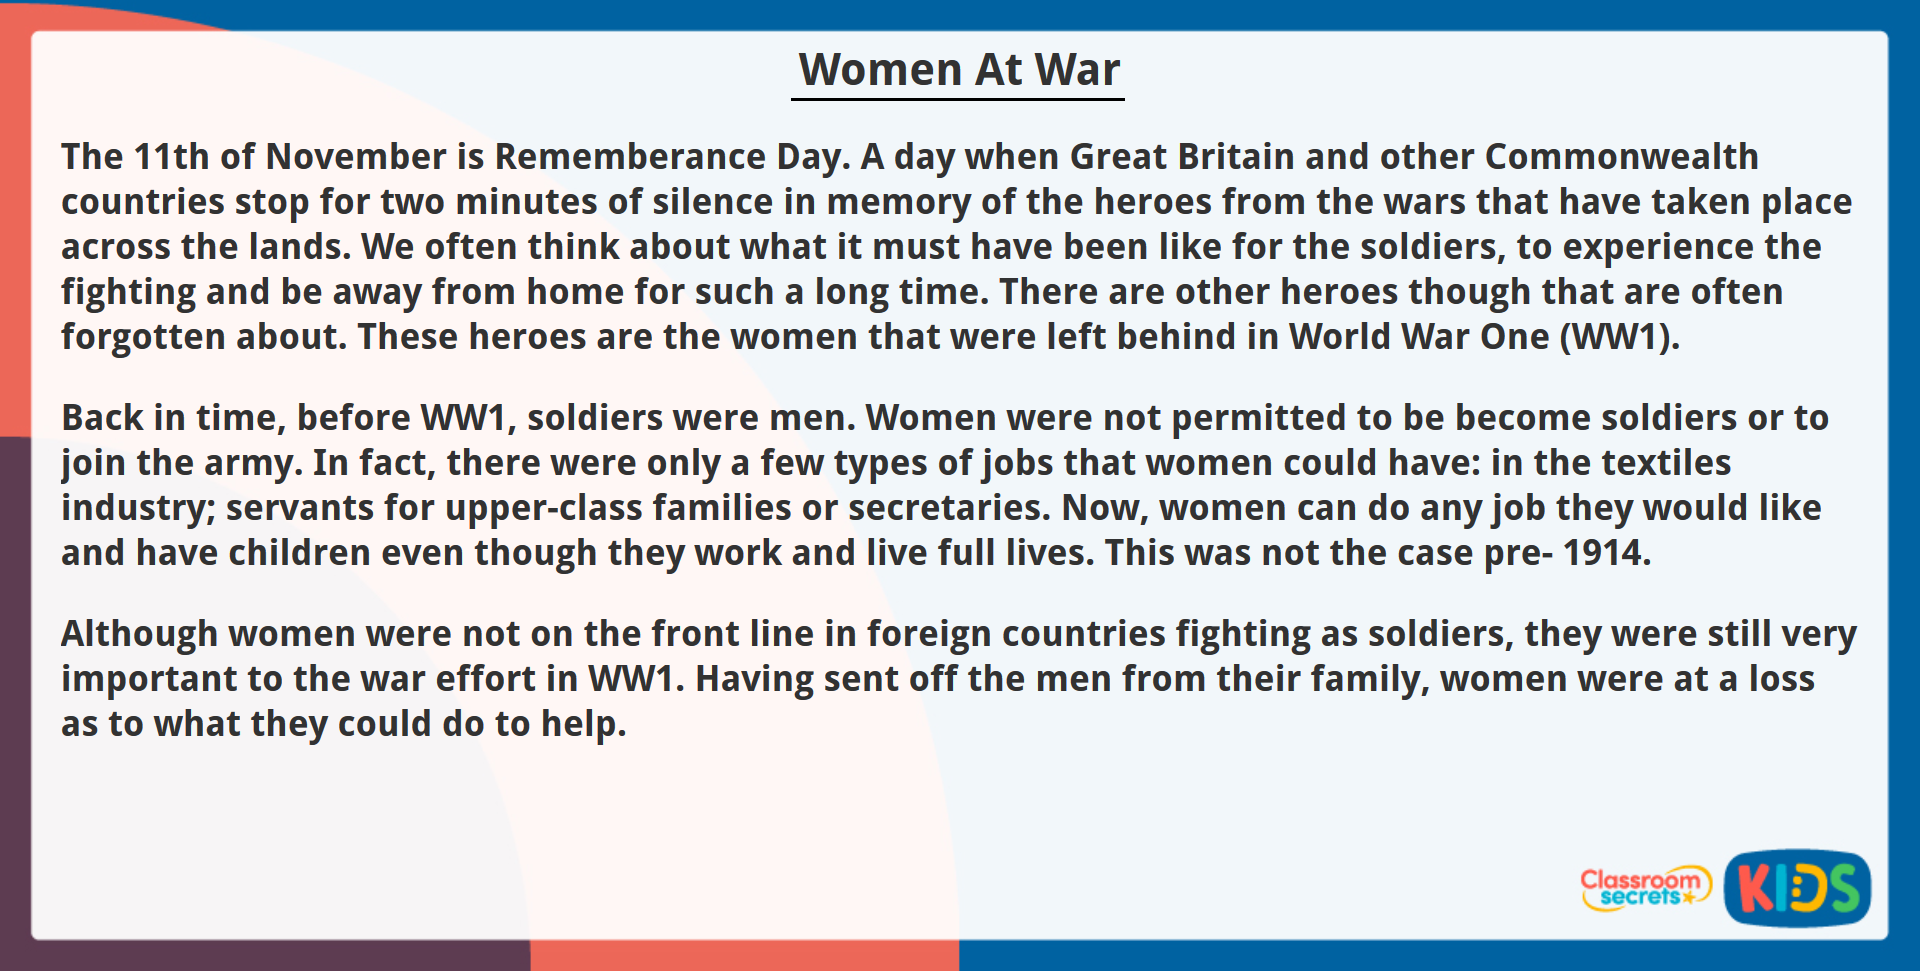 year 6 reading comprehension women at war classroom